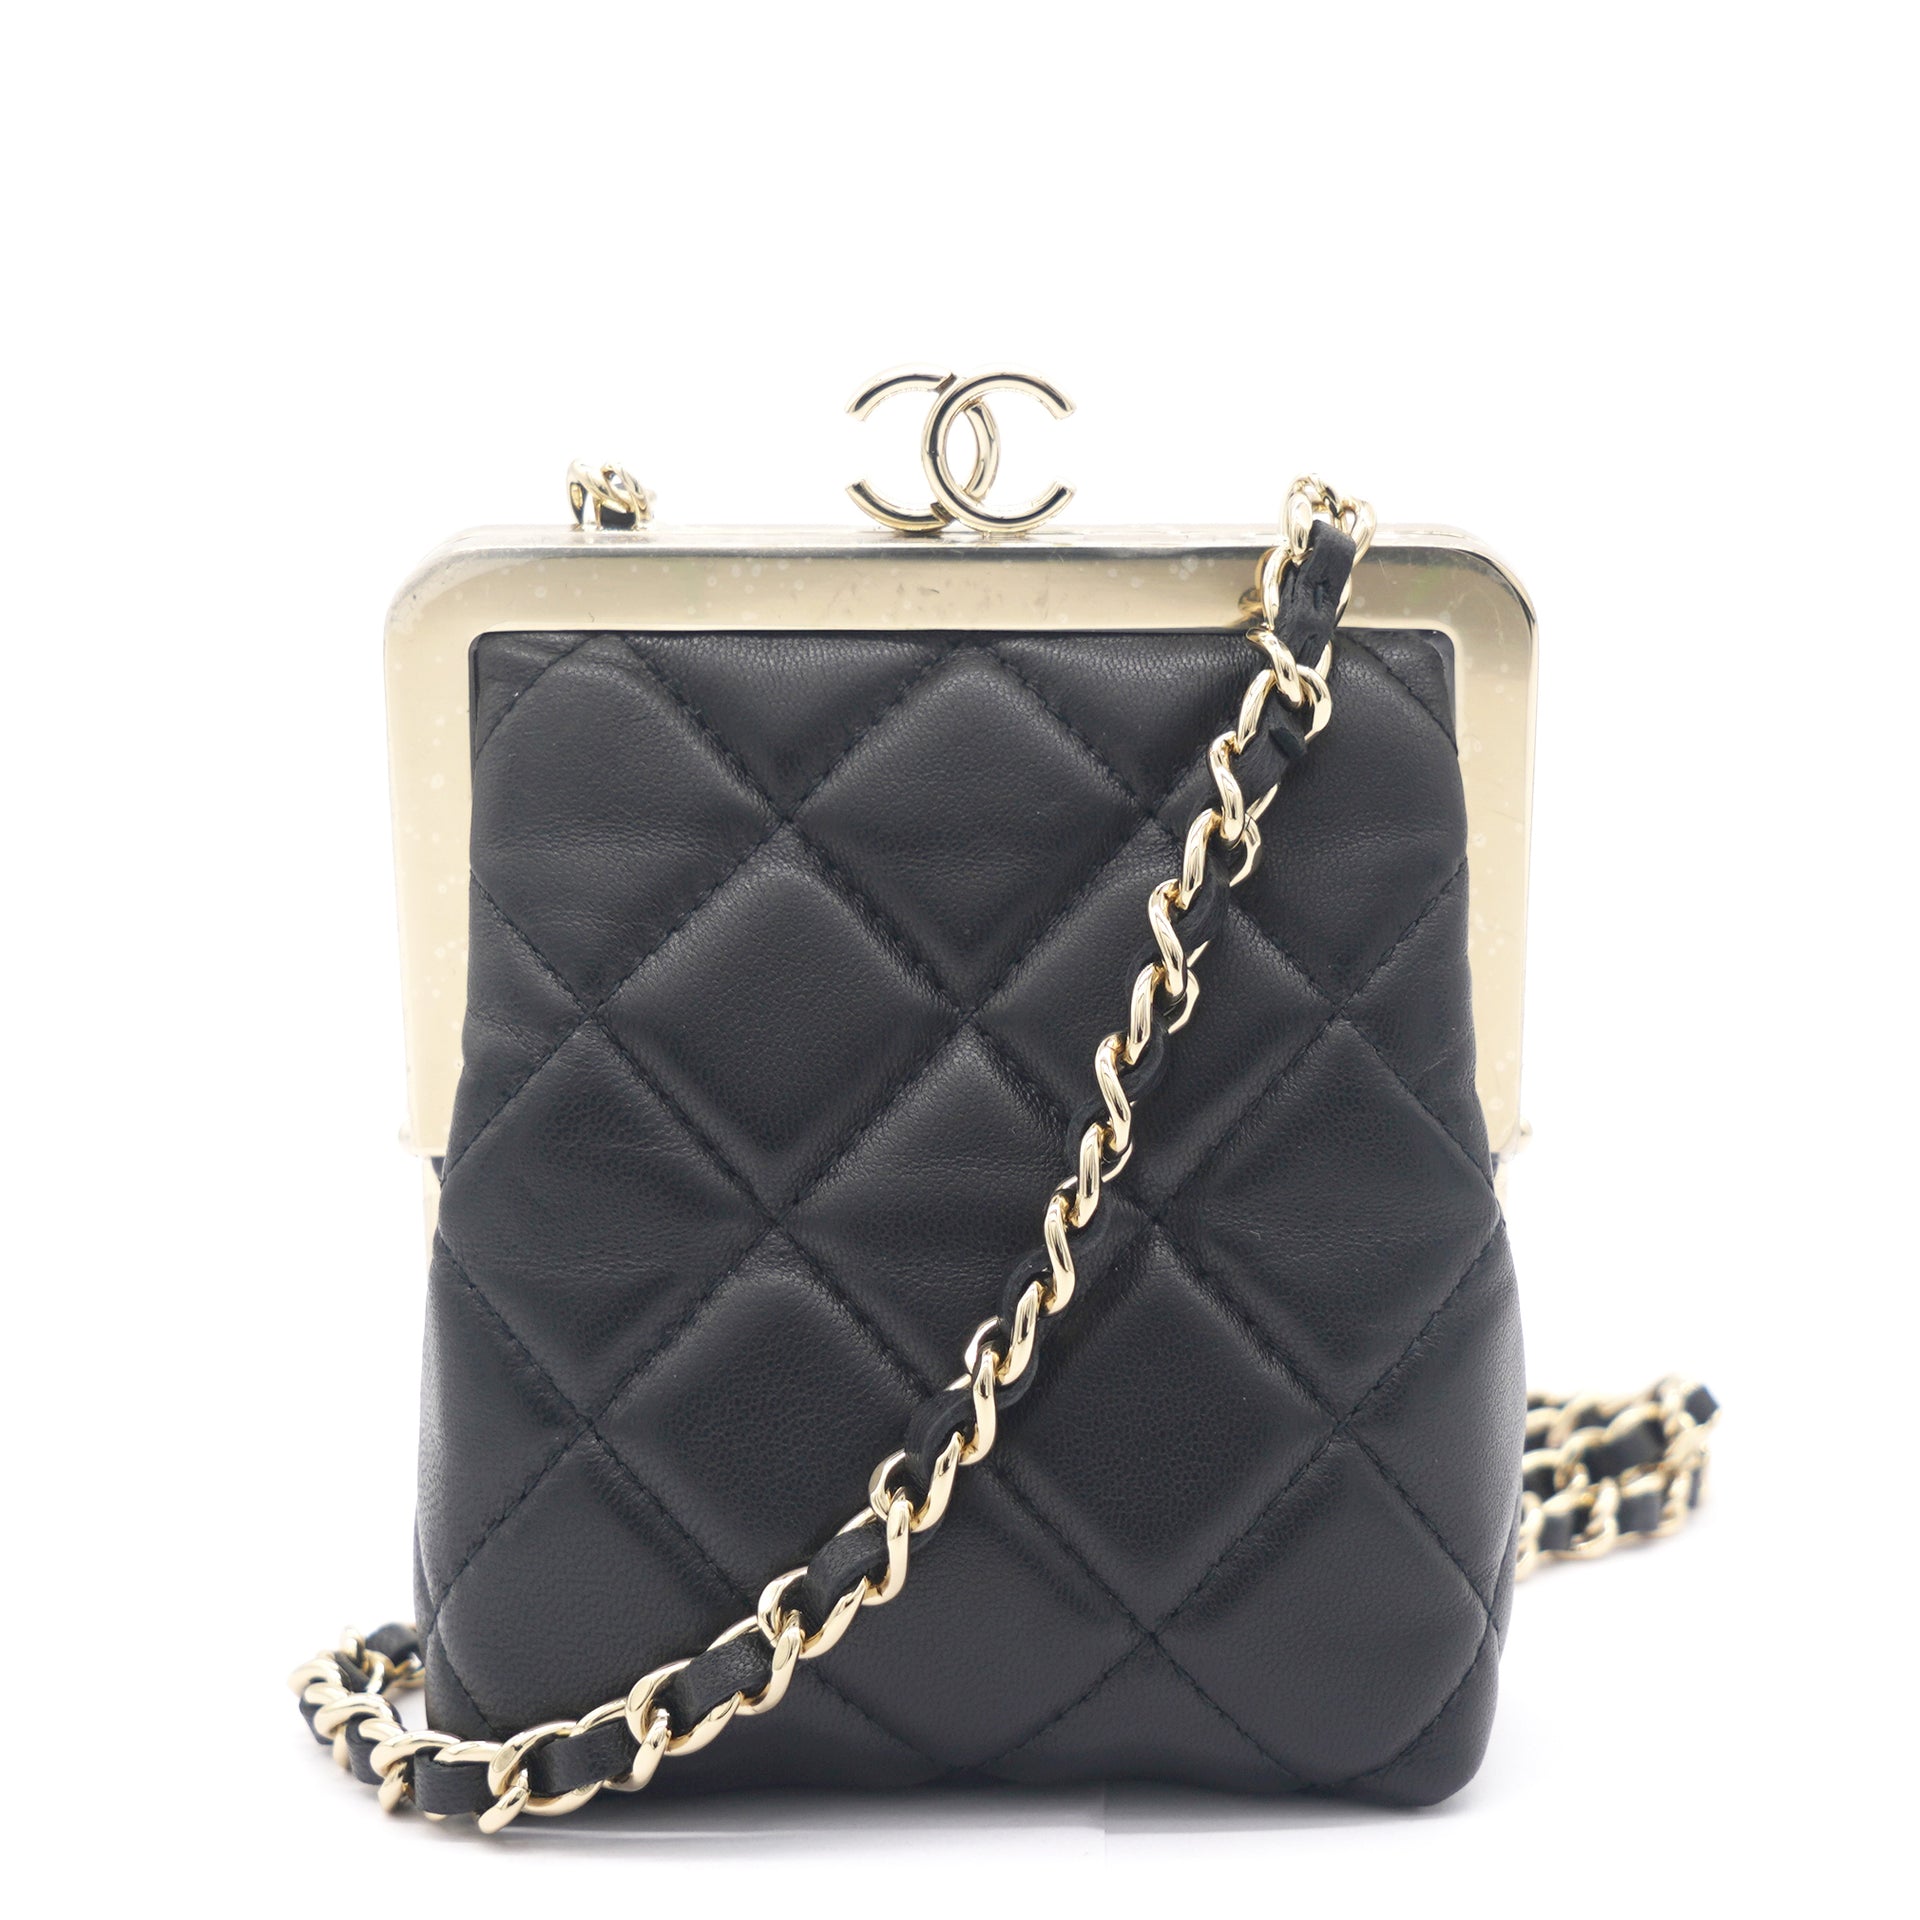 CHANEL Silver Hw Single Flap Chain Shoulder Bag Black Quilted Lam Leather  ref204915  Joli Closet